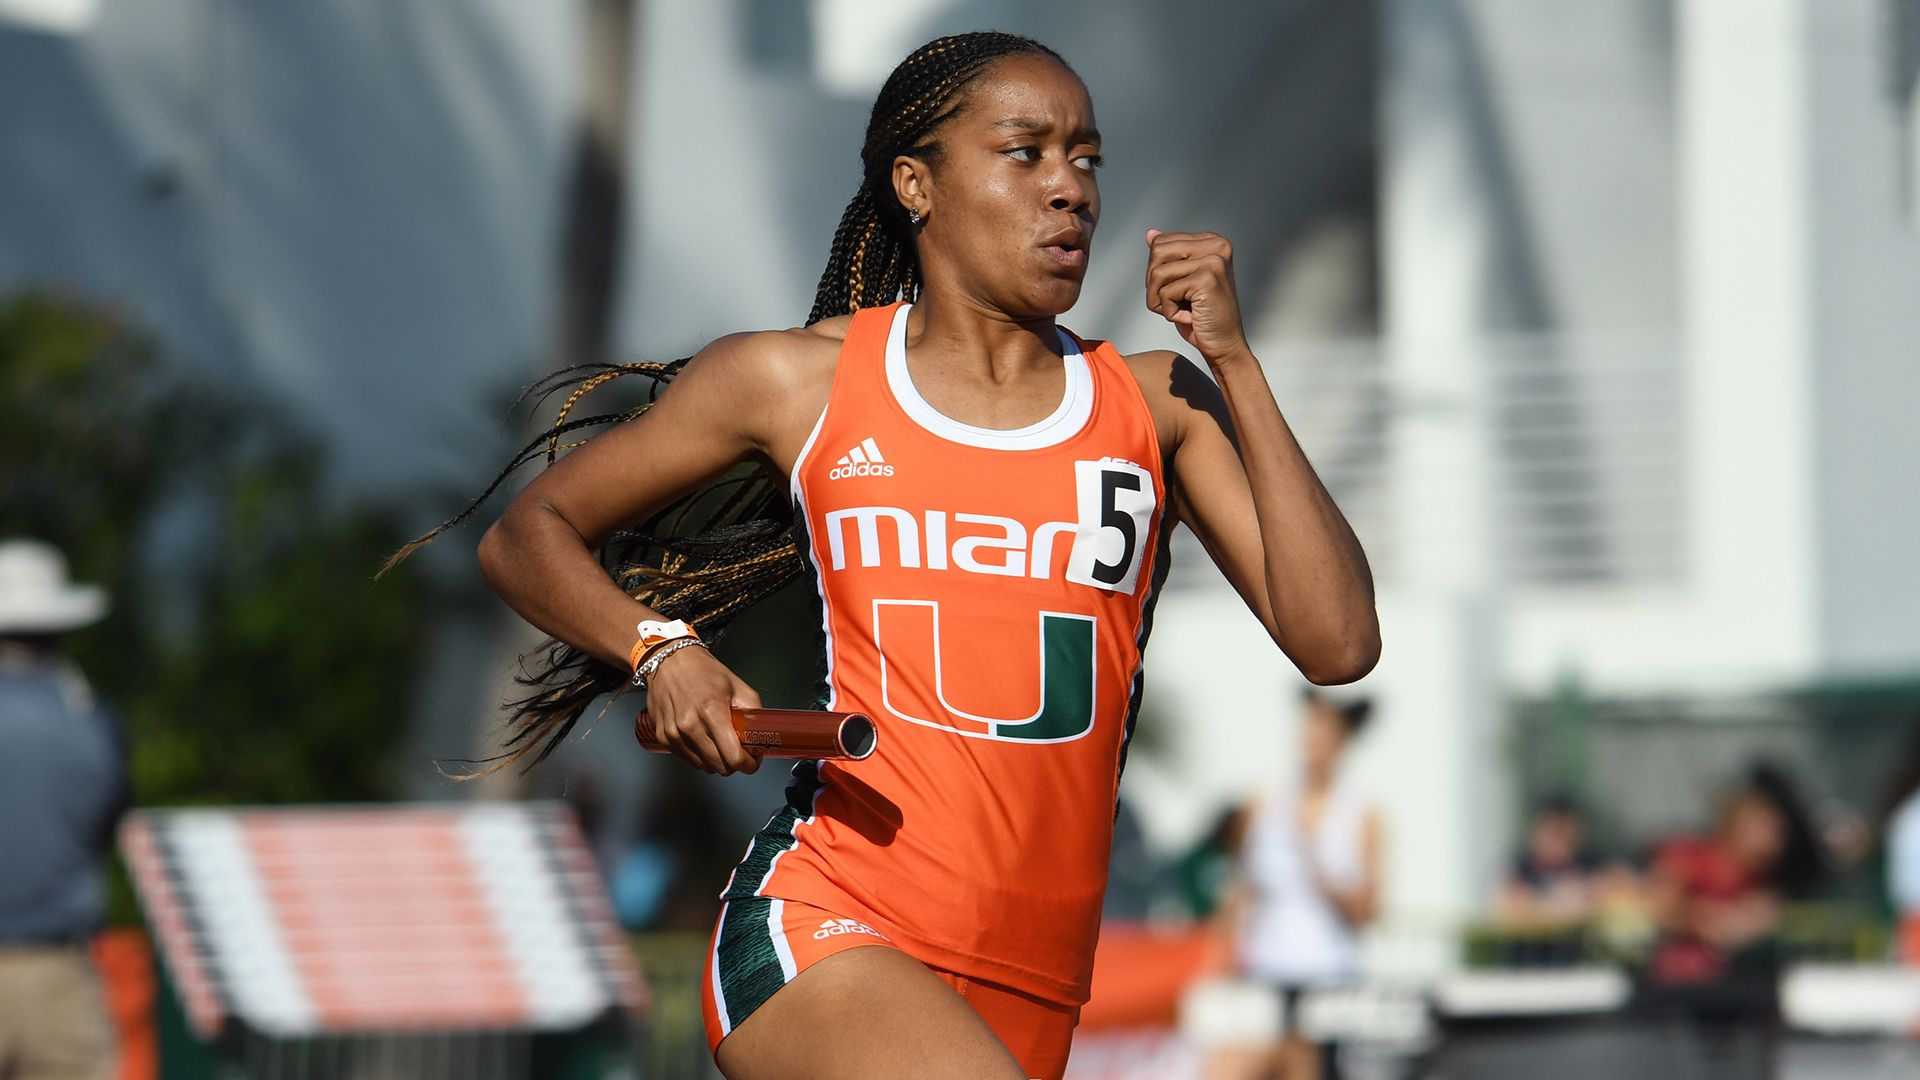 Johnson Wins Third ACC Performer of the Week